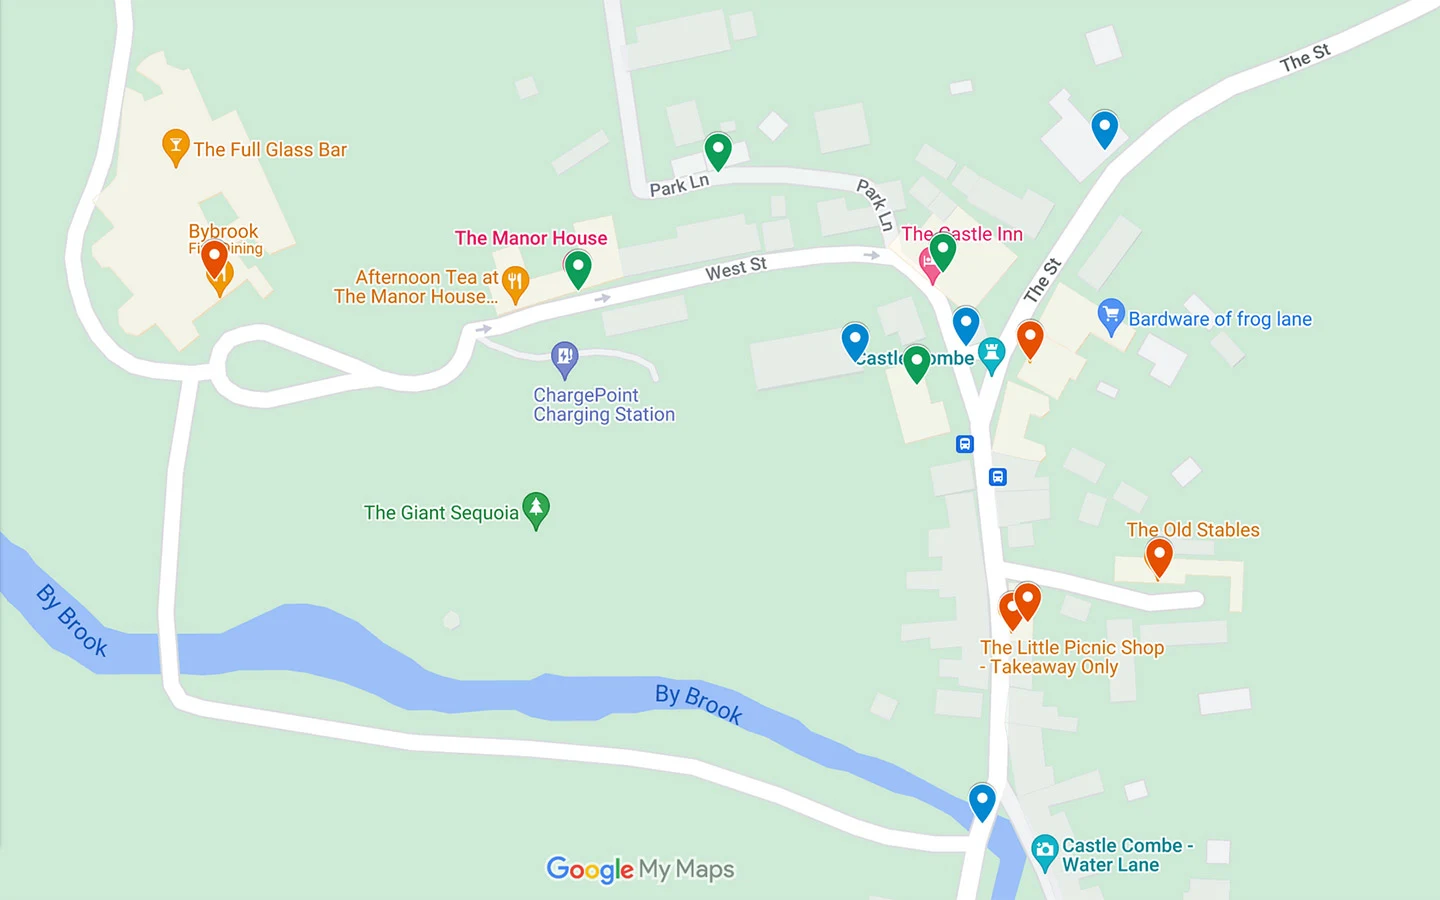 Map of things to do in Castle Combe